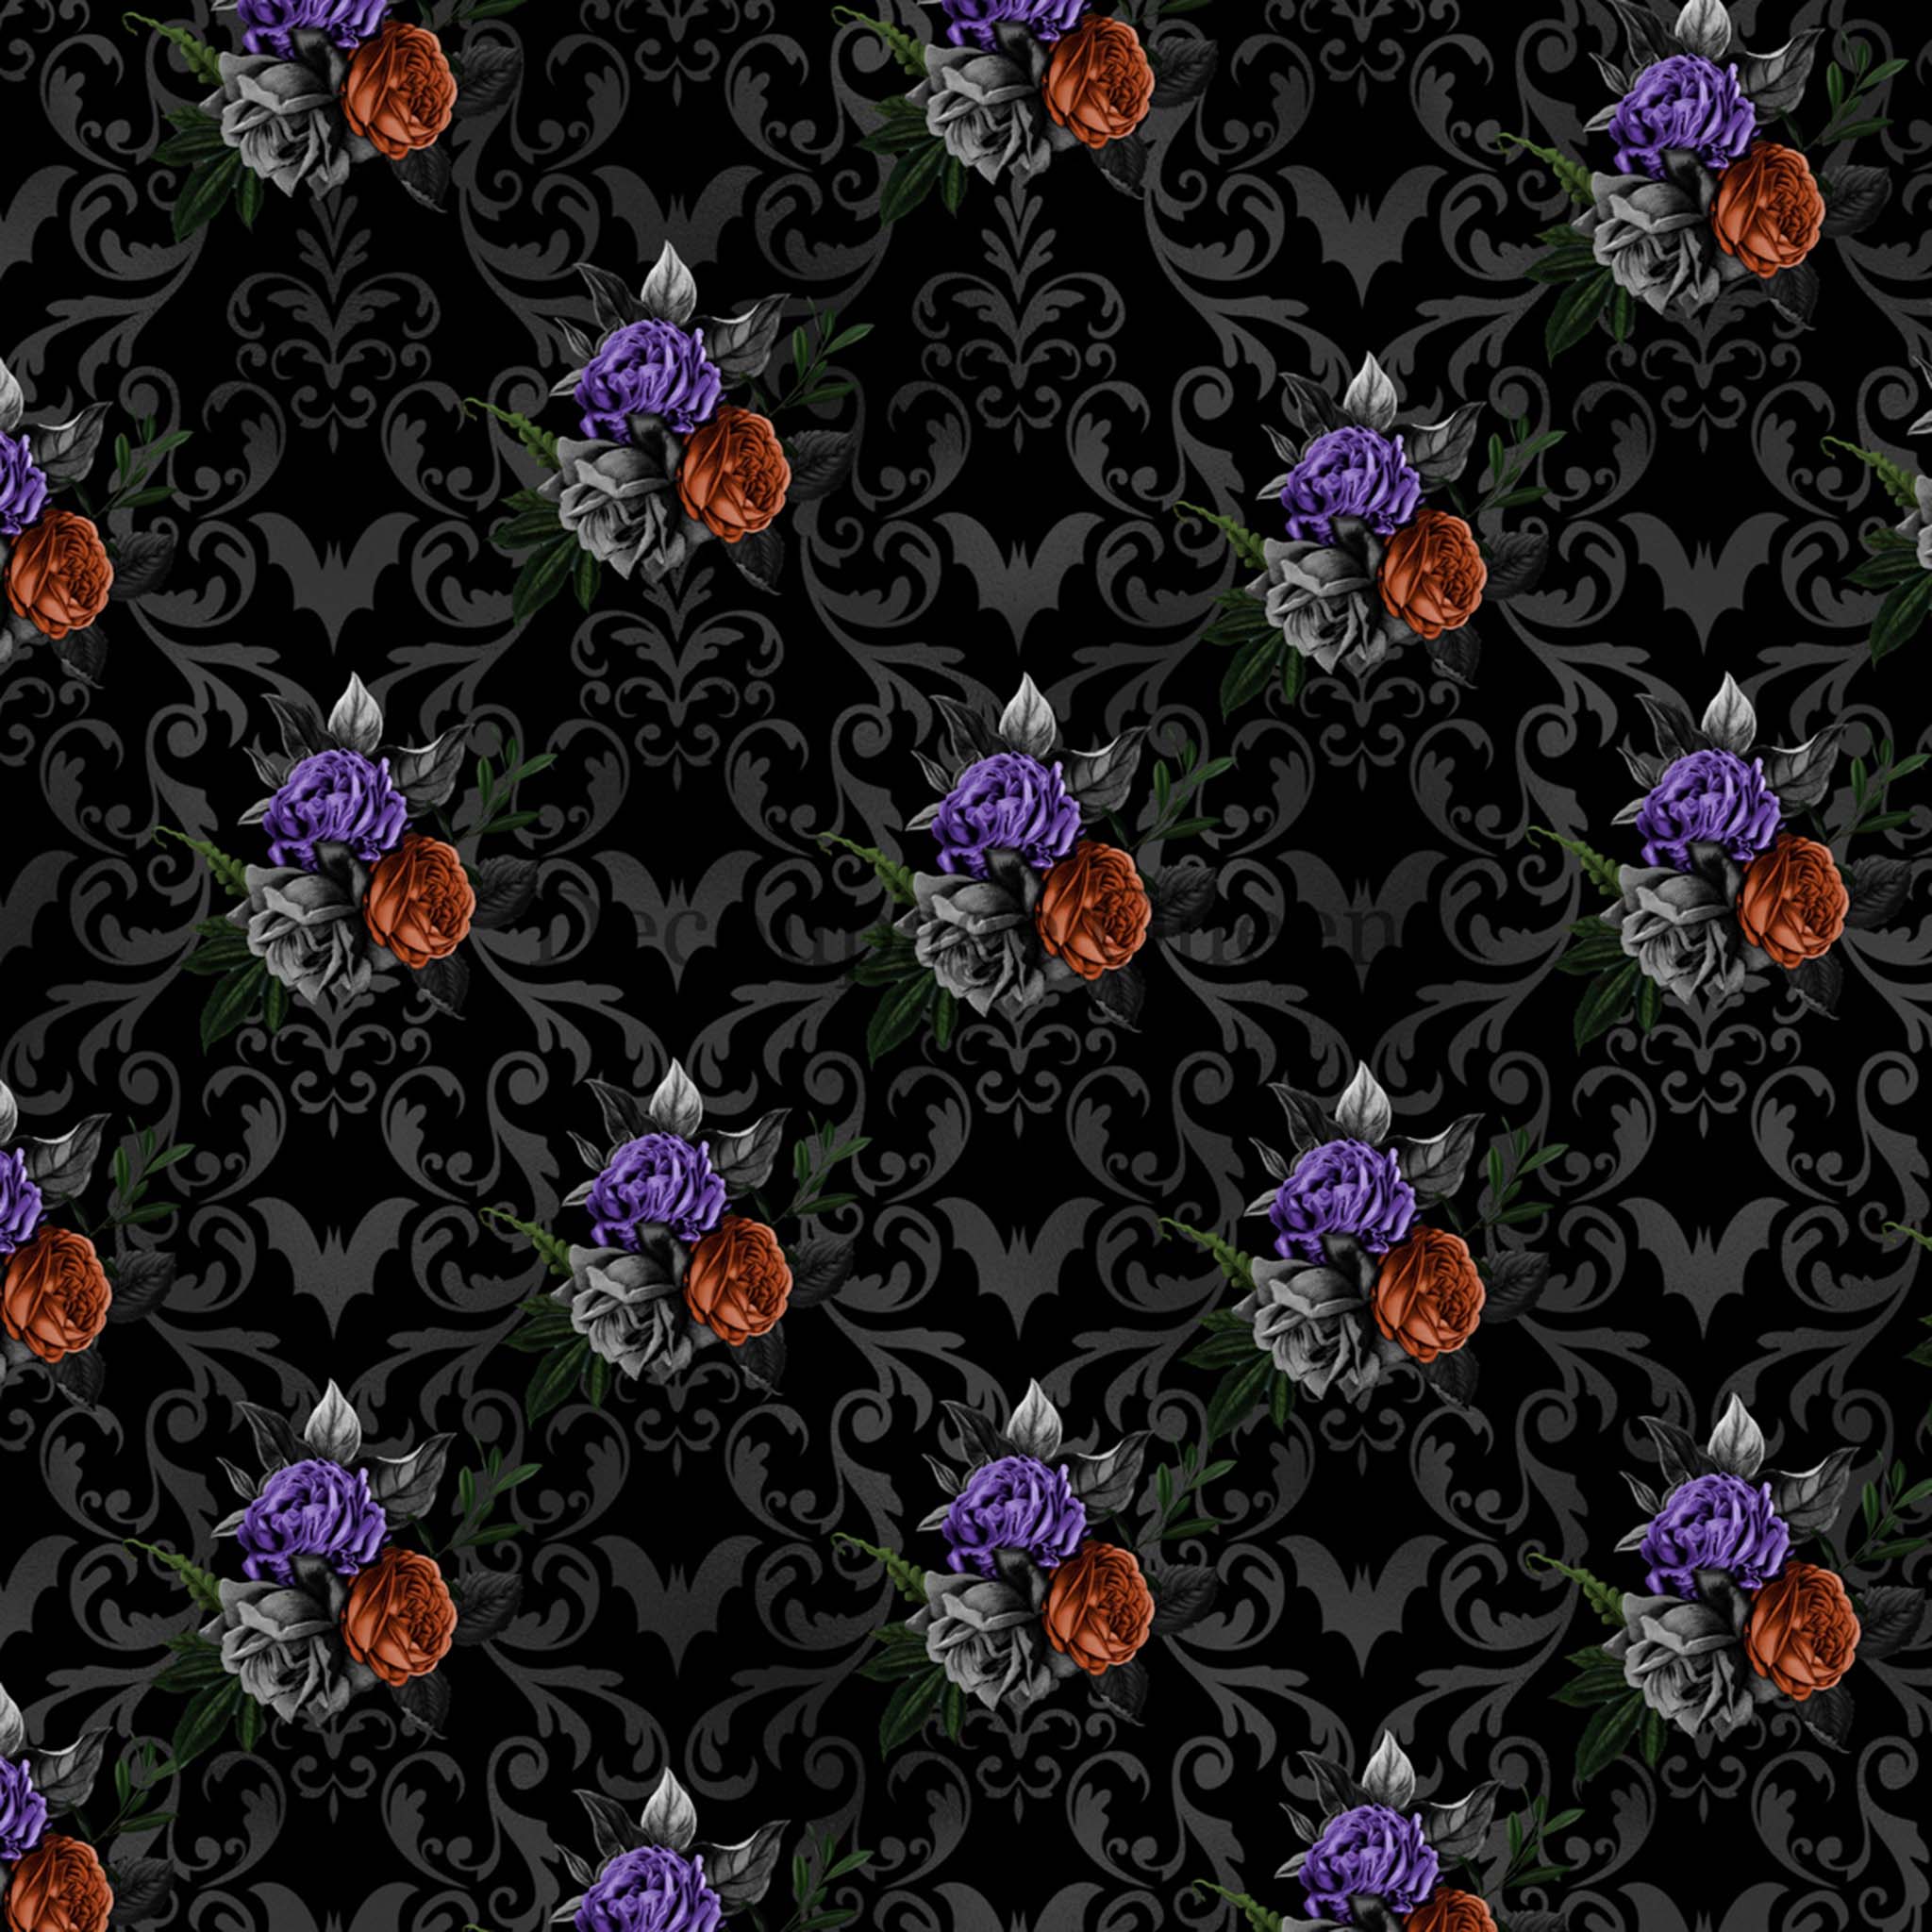 A1 rice paper design that  features a dark floral Halloween pattern of bunched grey, purple and red roses surrounded by a grey brocade all against a black background.